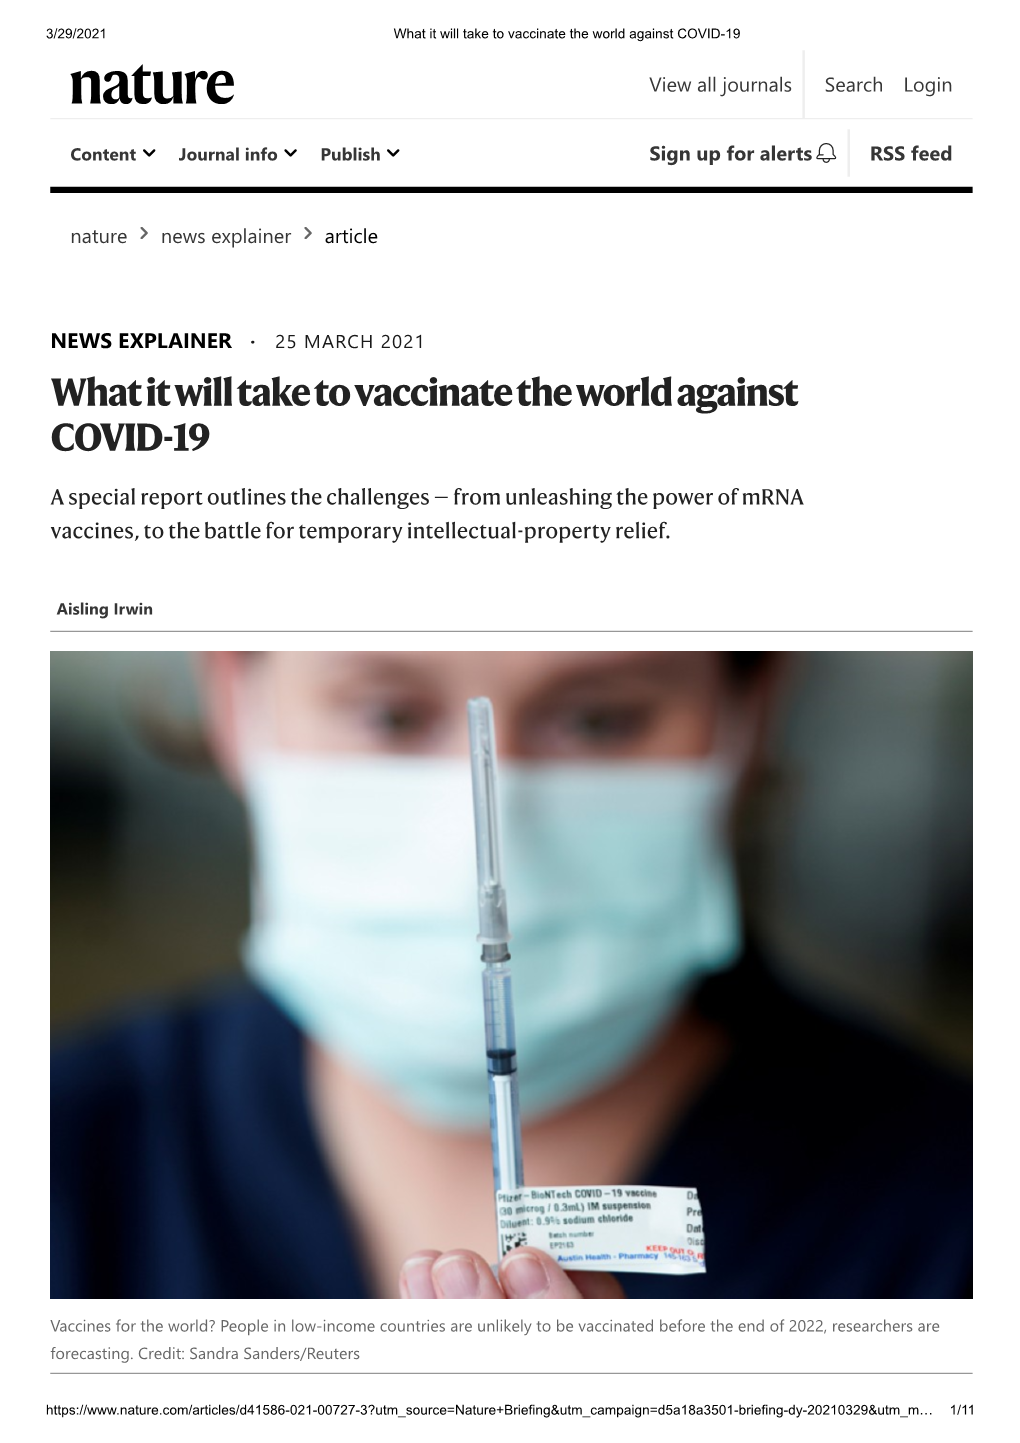 What It Will Take to Vaccinate the World Against COVID-19